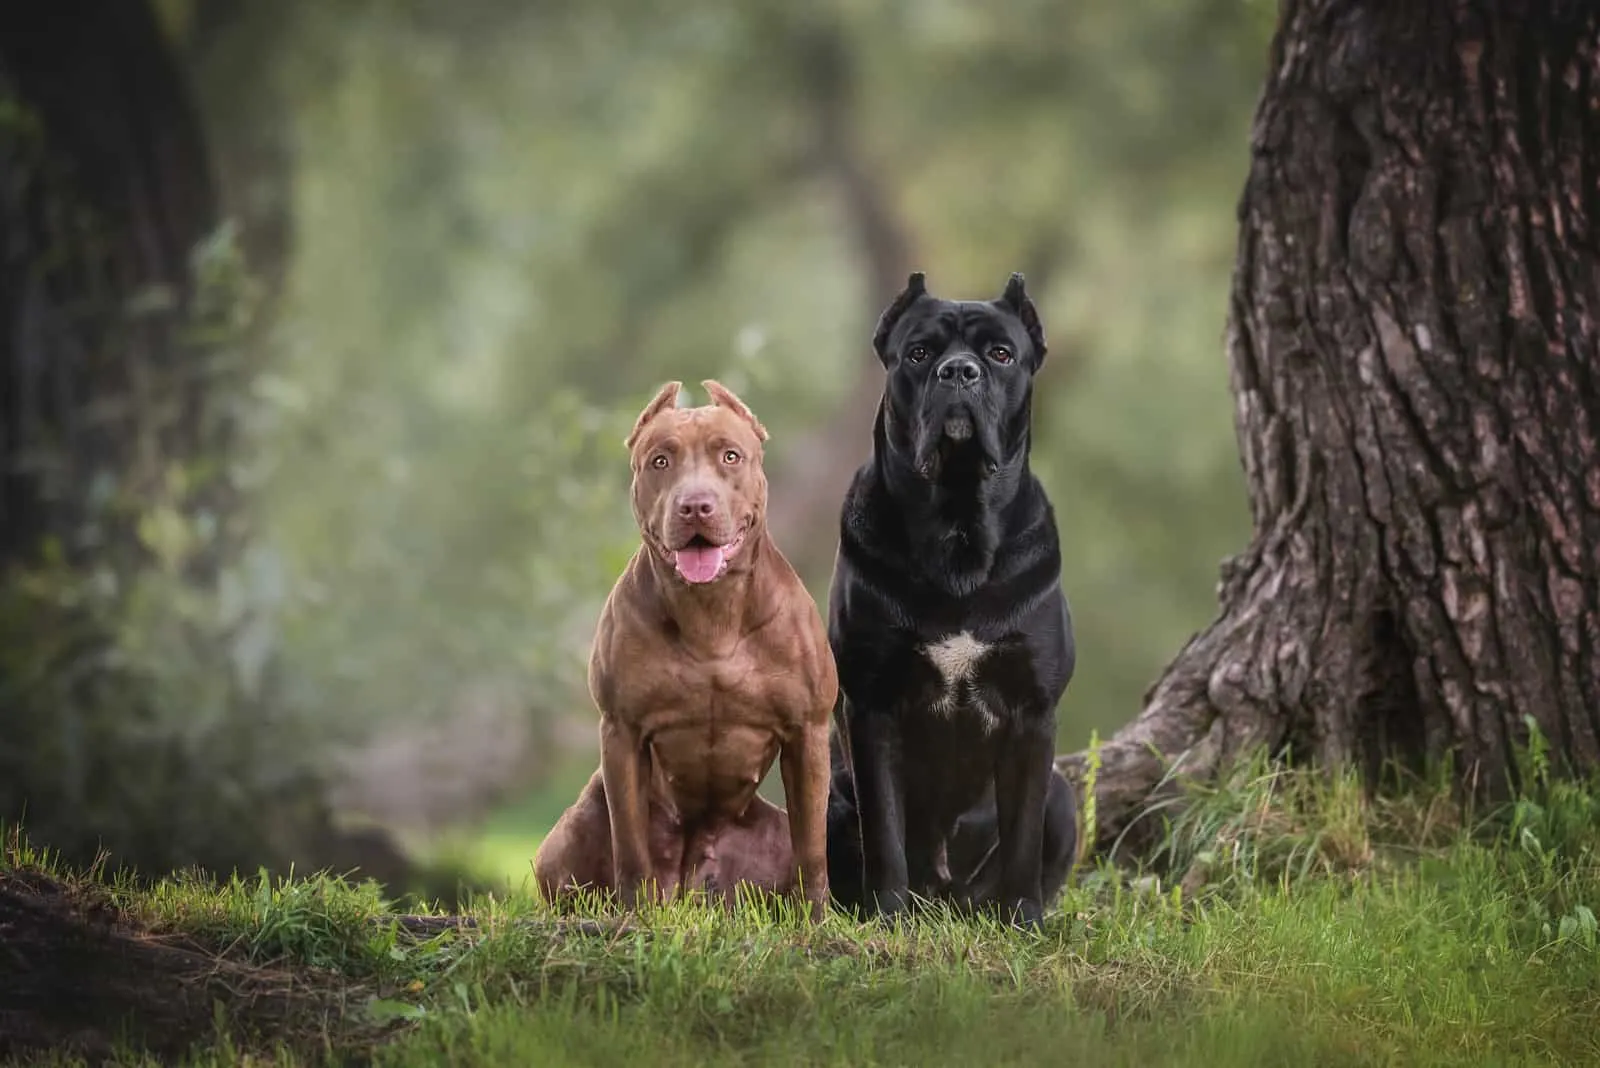 Two Cane Corsos standing in nature